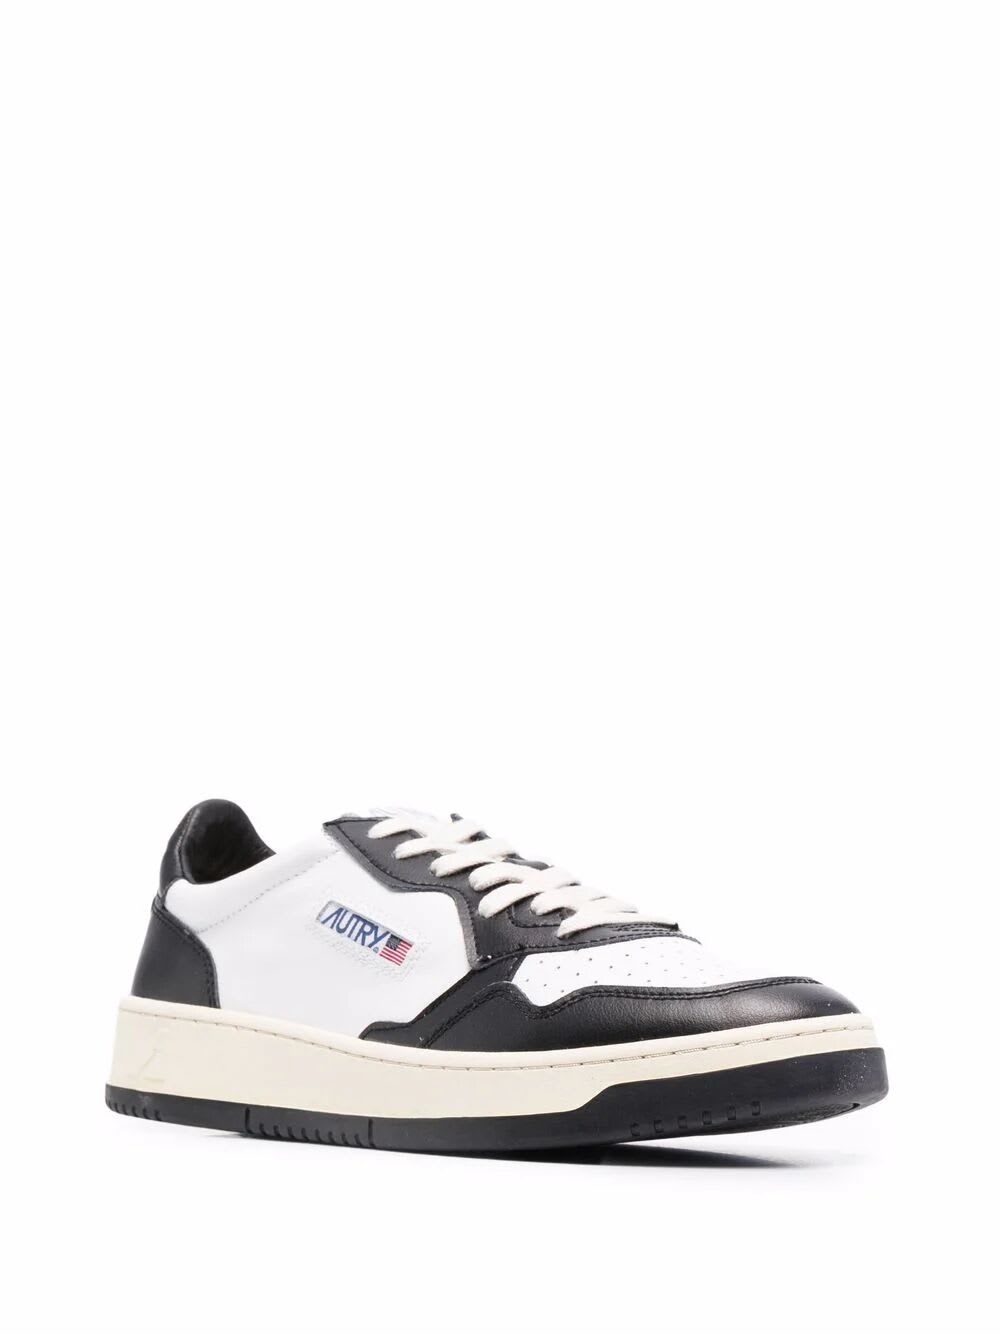 Shop Autry Medalist Low Sneakers In White Black